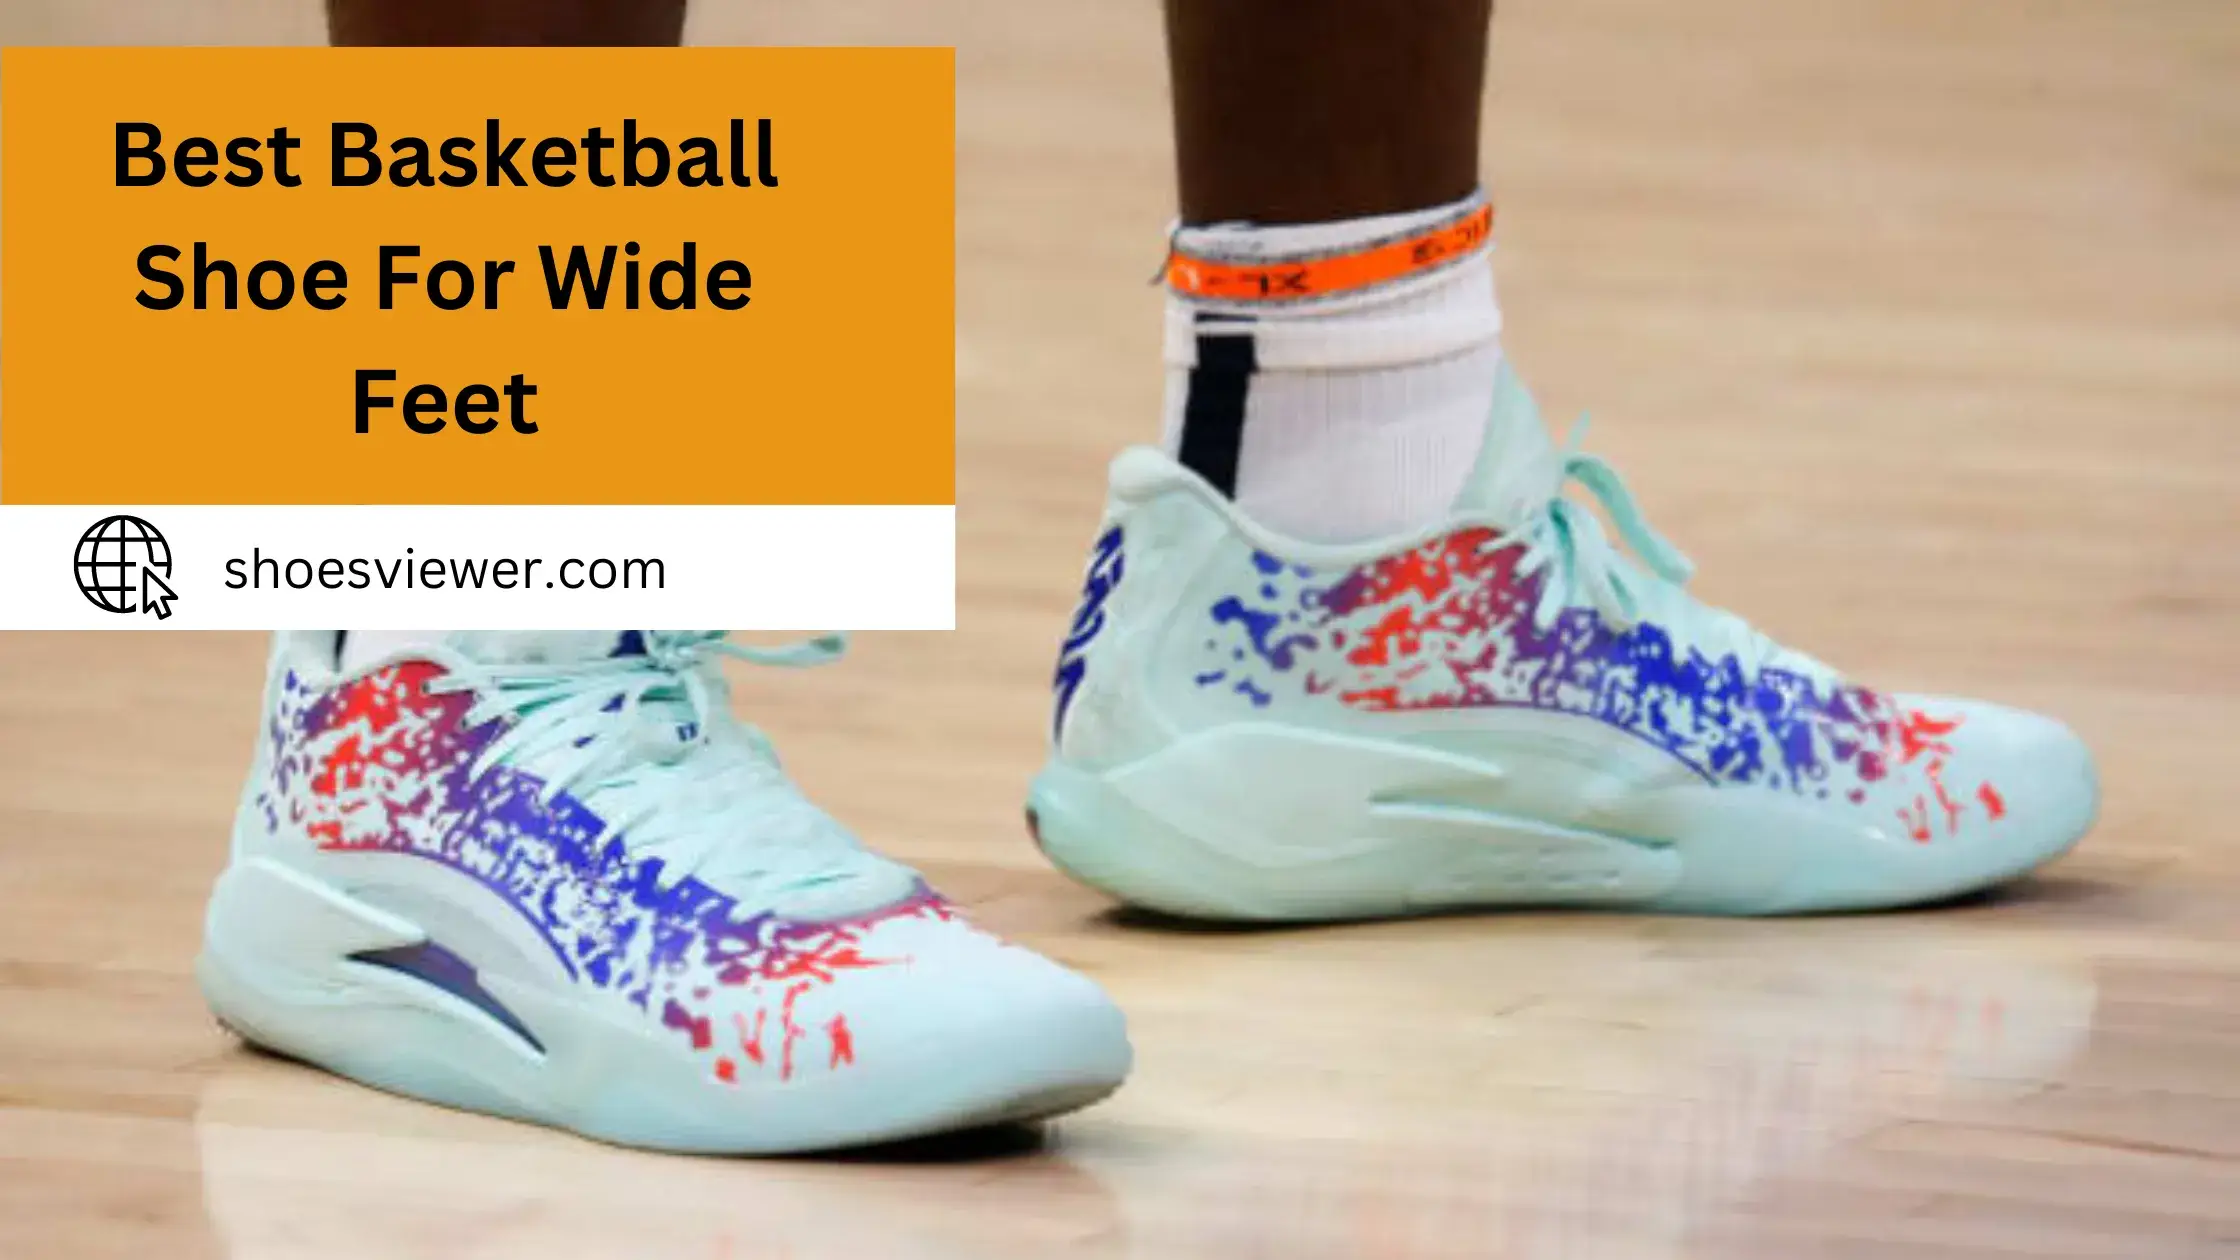 Best Basketball Shoe For Wide Feet - A Comprehensive Guide